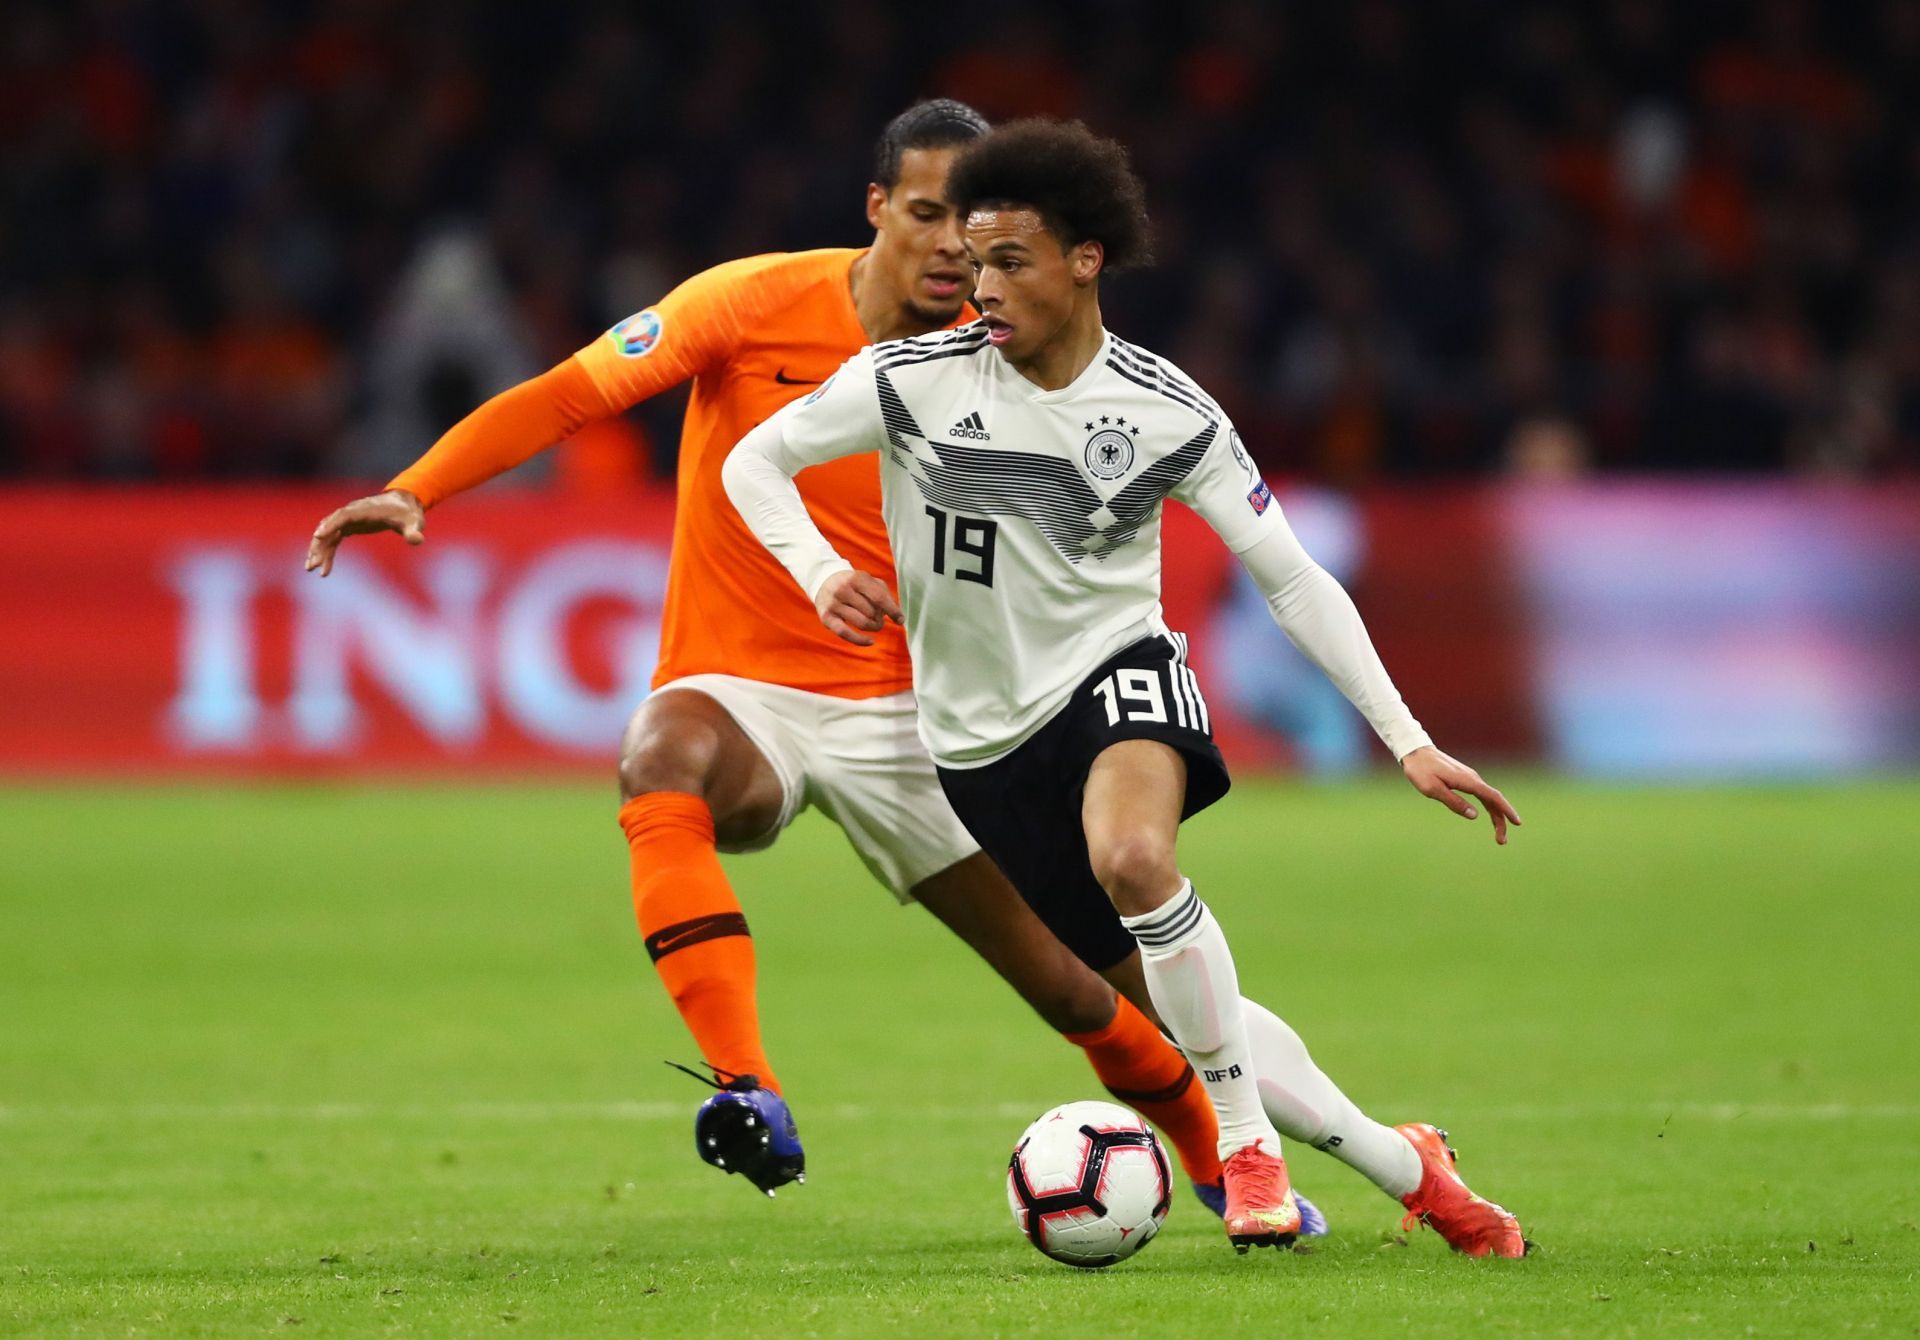 The Netherlands take on Germany this week